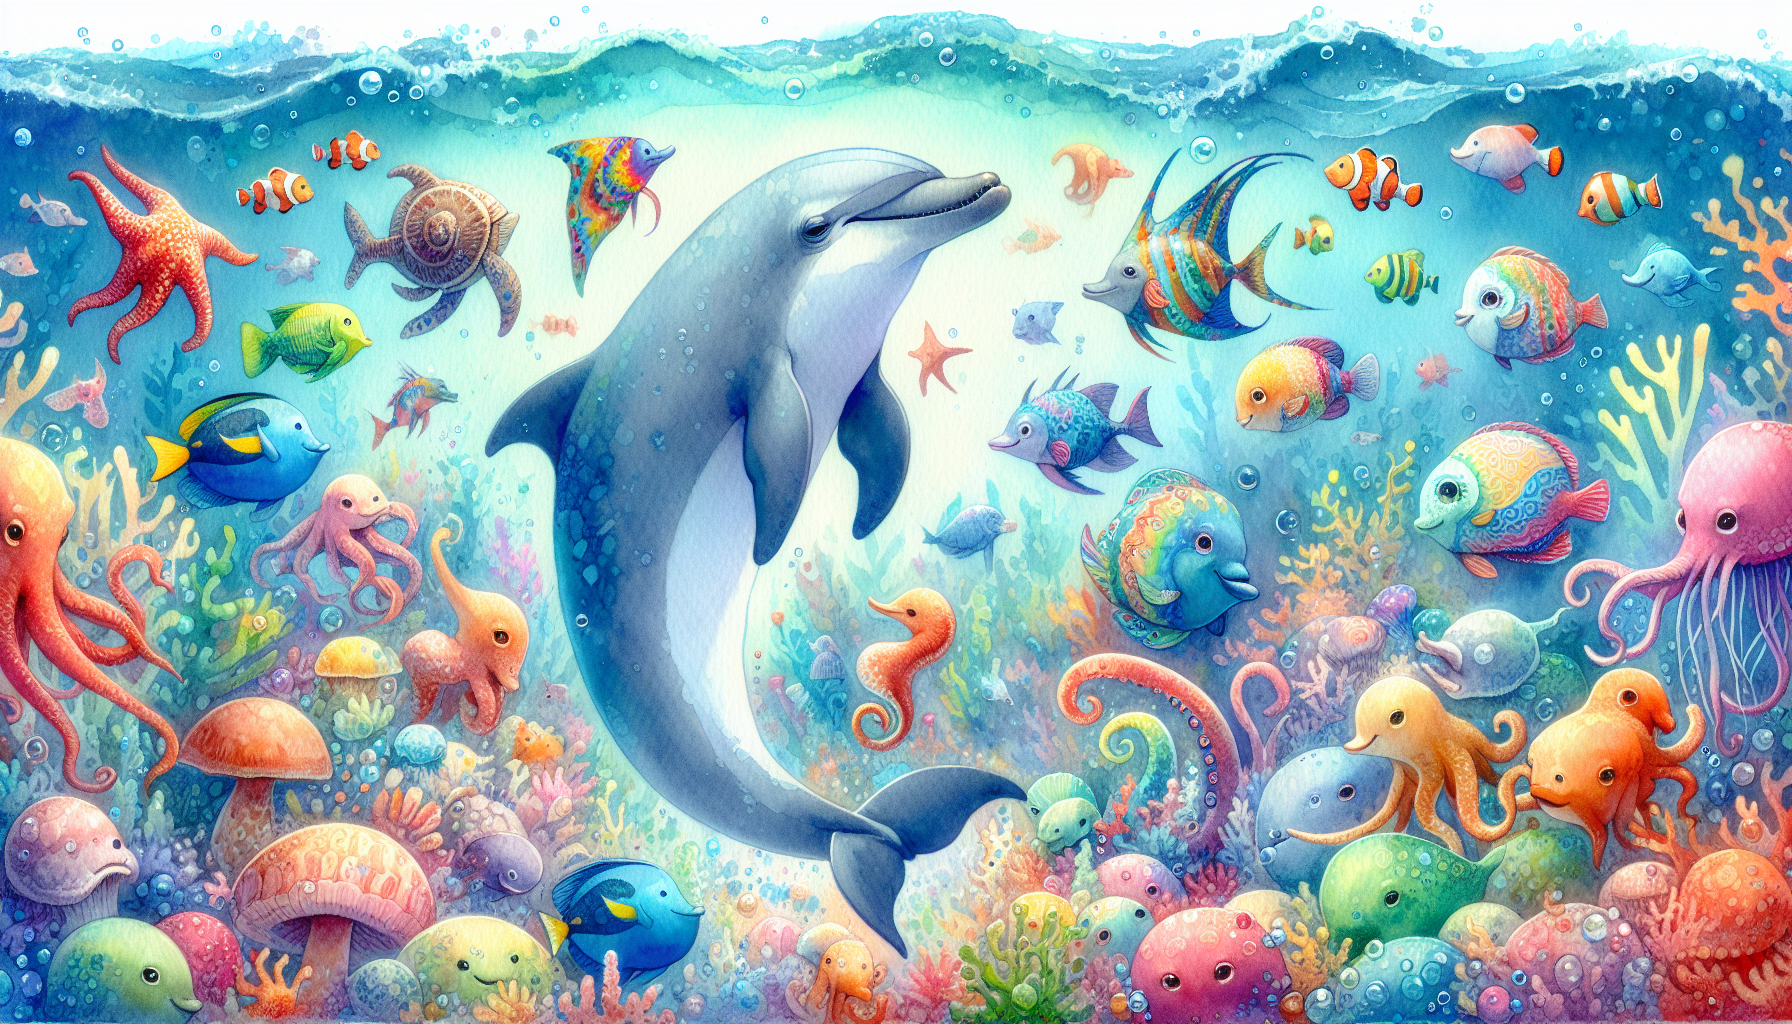 Dolphin Dance Friendship with the Sea Creatures